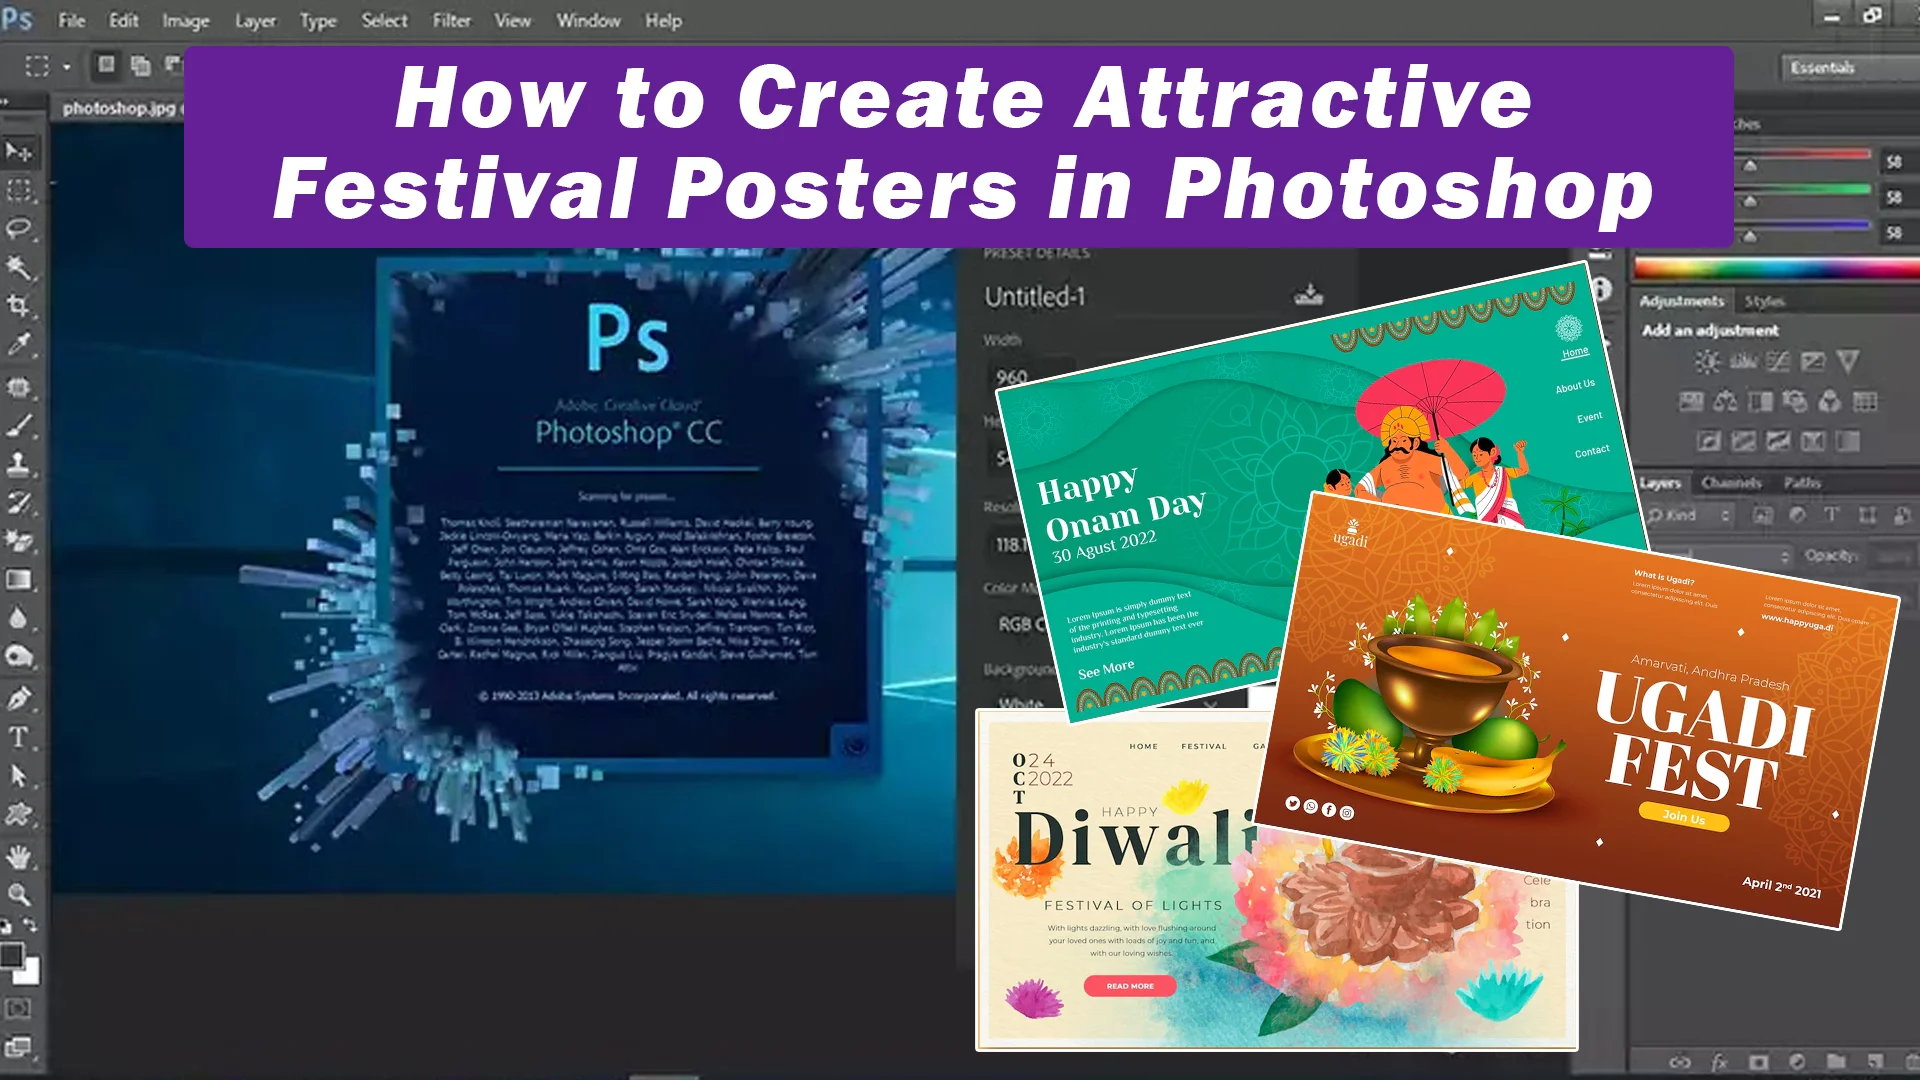 How to create 100 attractive festival poster design photoshop